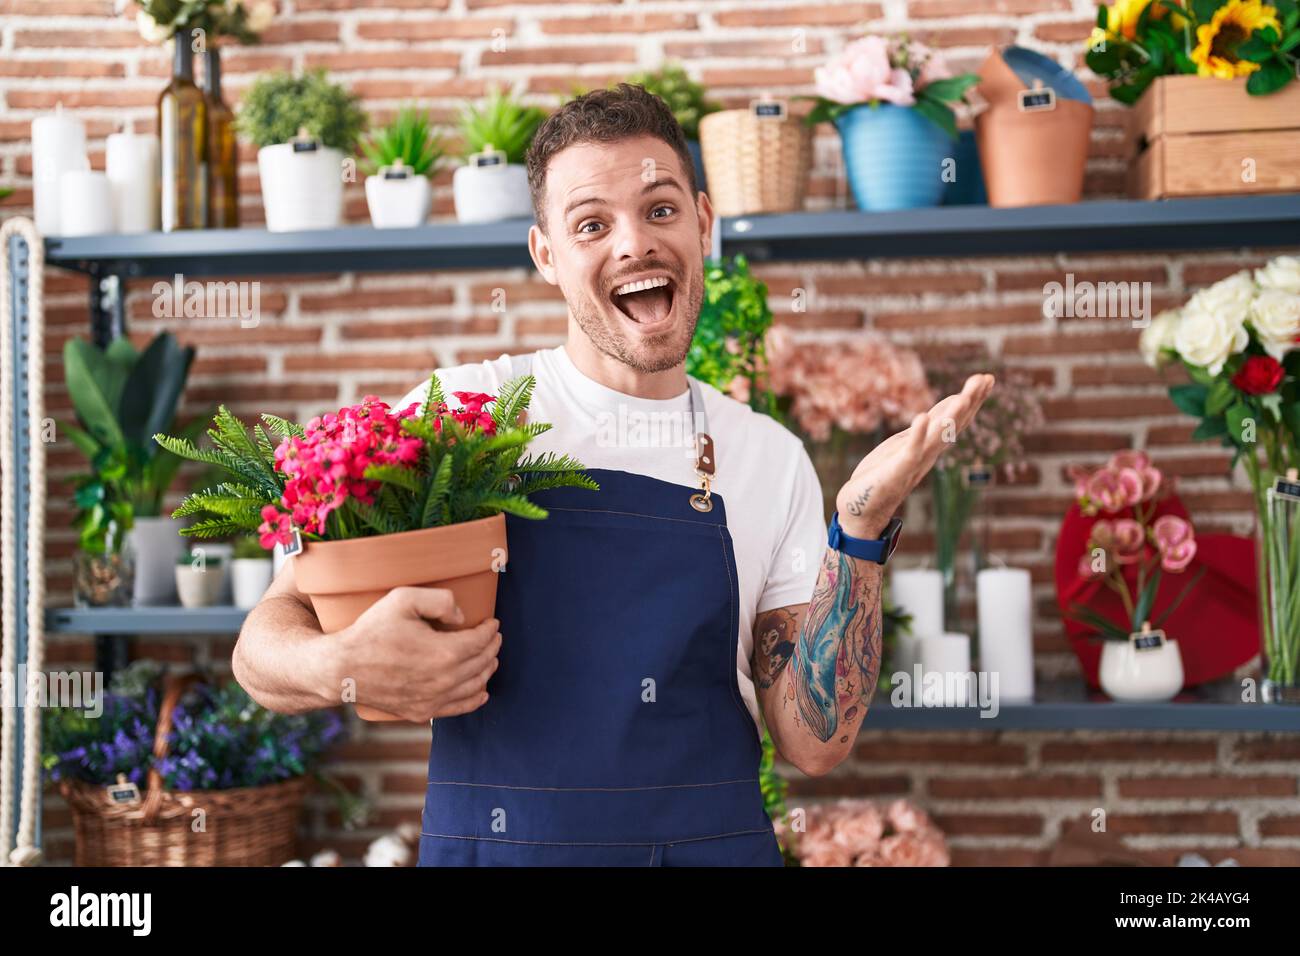 Young hispanic man working at florist shop holding plant pot celebrating achievement with happy smile and winner expression with raised hand Stock Photo